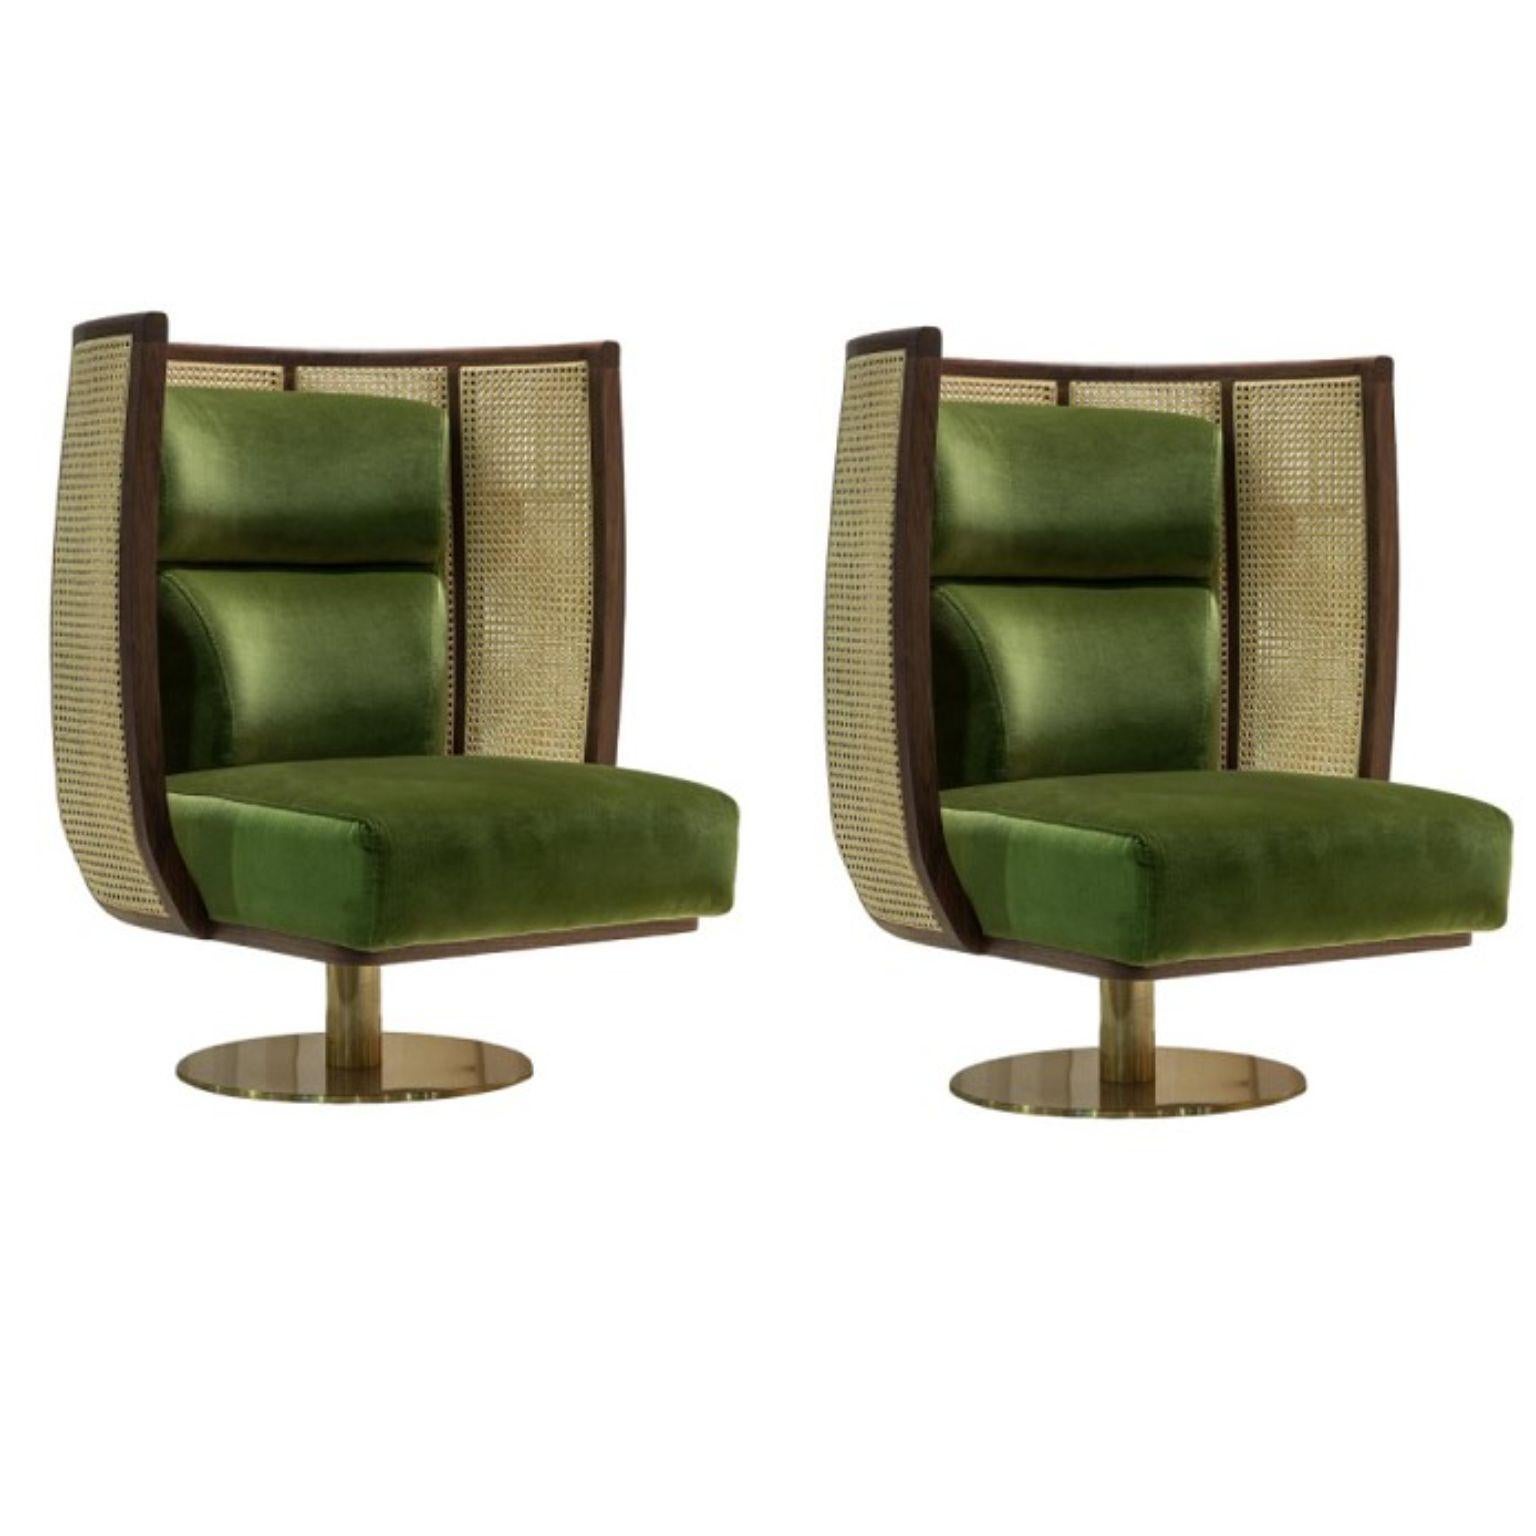 Set of 2 Egoista armchairs by Dooq
Measures: W 80 cm 32”
D 80 cm 32”
H 100 cm 39”
seat height 40 cm 16”

Materials: upholstery fabric or leather; structure solid wood feet lacquered MDF or solid wood rattan natural rattan. COM with natural